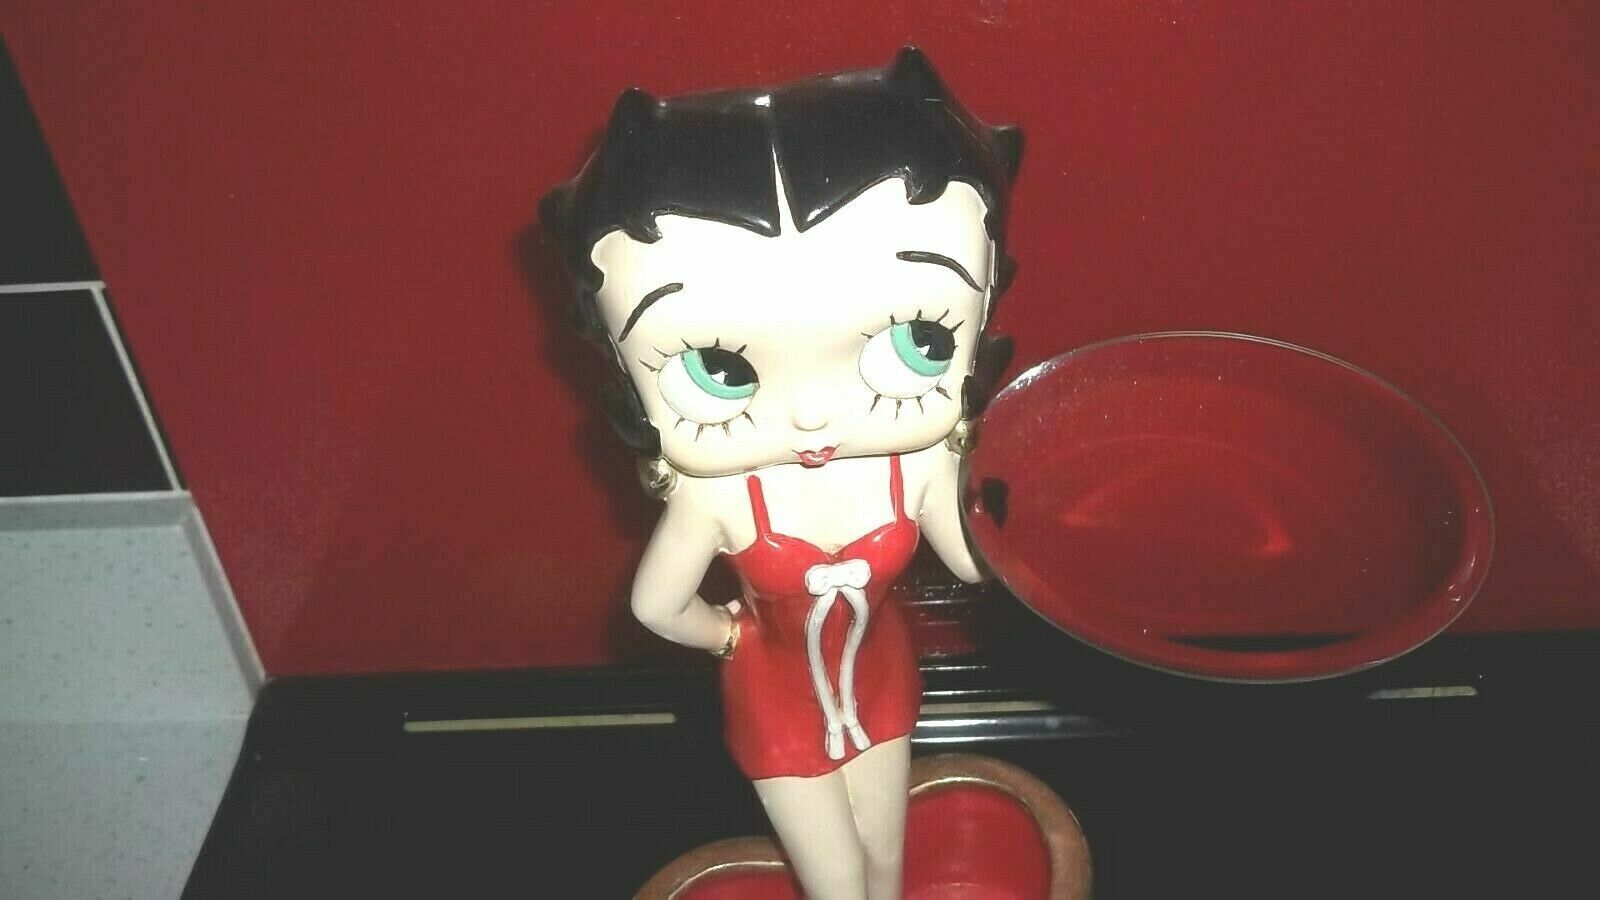 Extremely Rare Betty Boop Standing in Heart Box Mirror Butler Figurine Statue